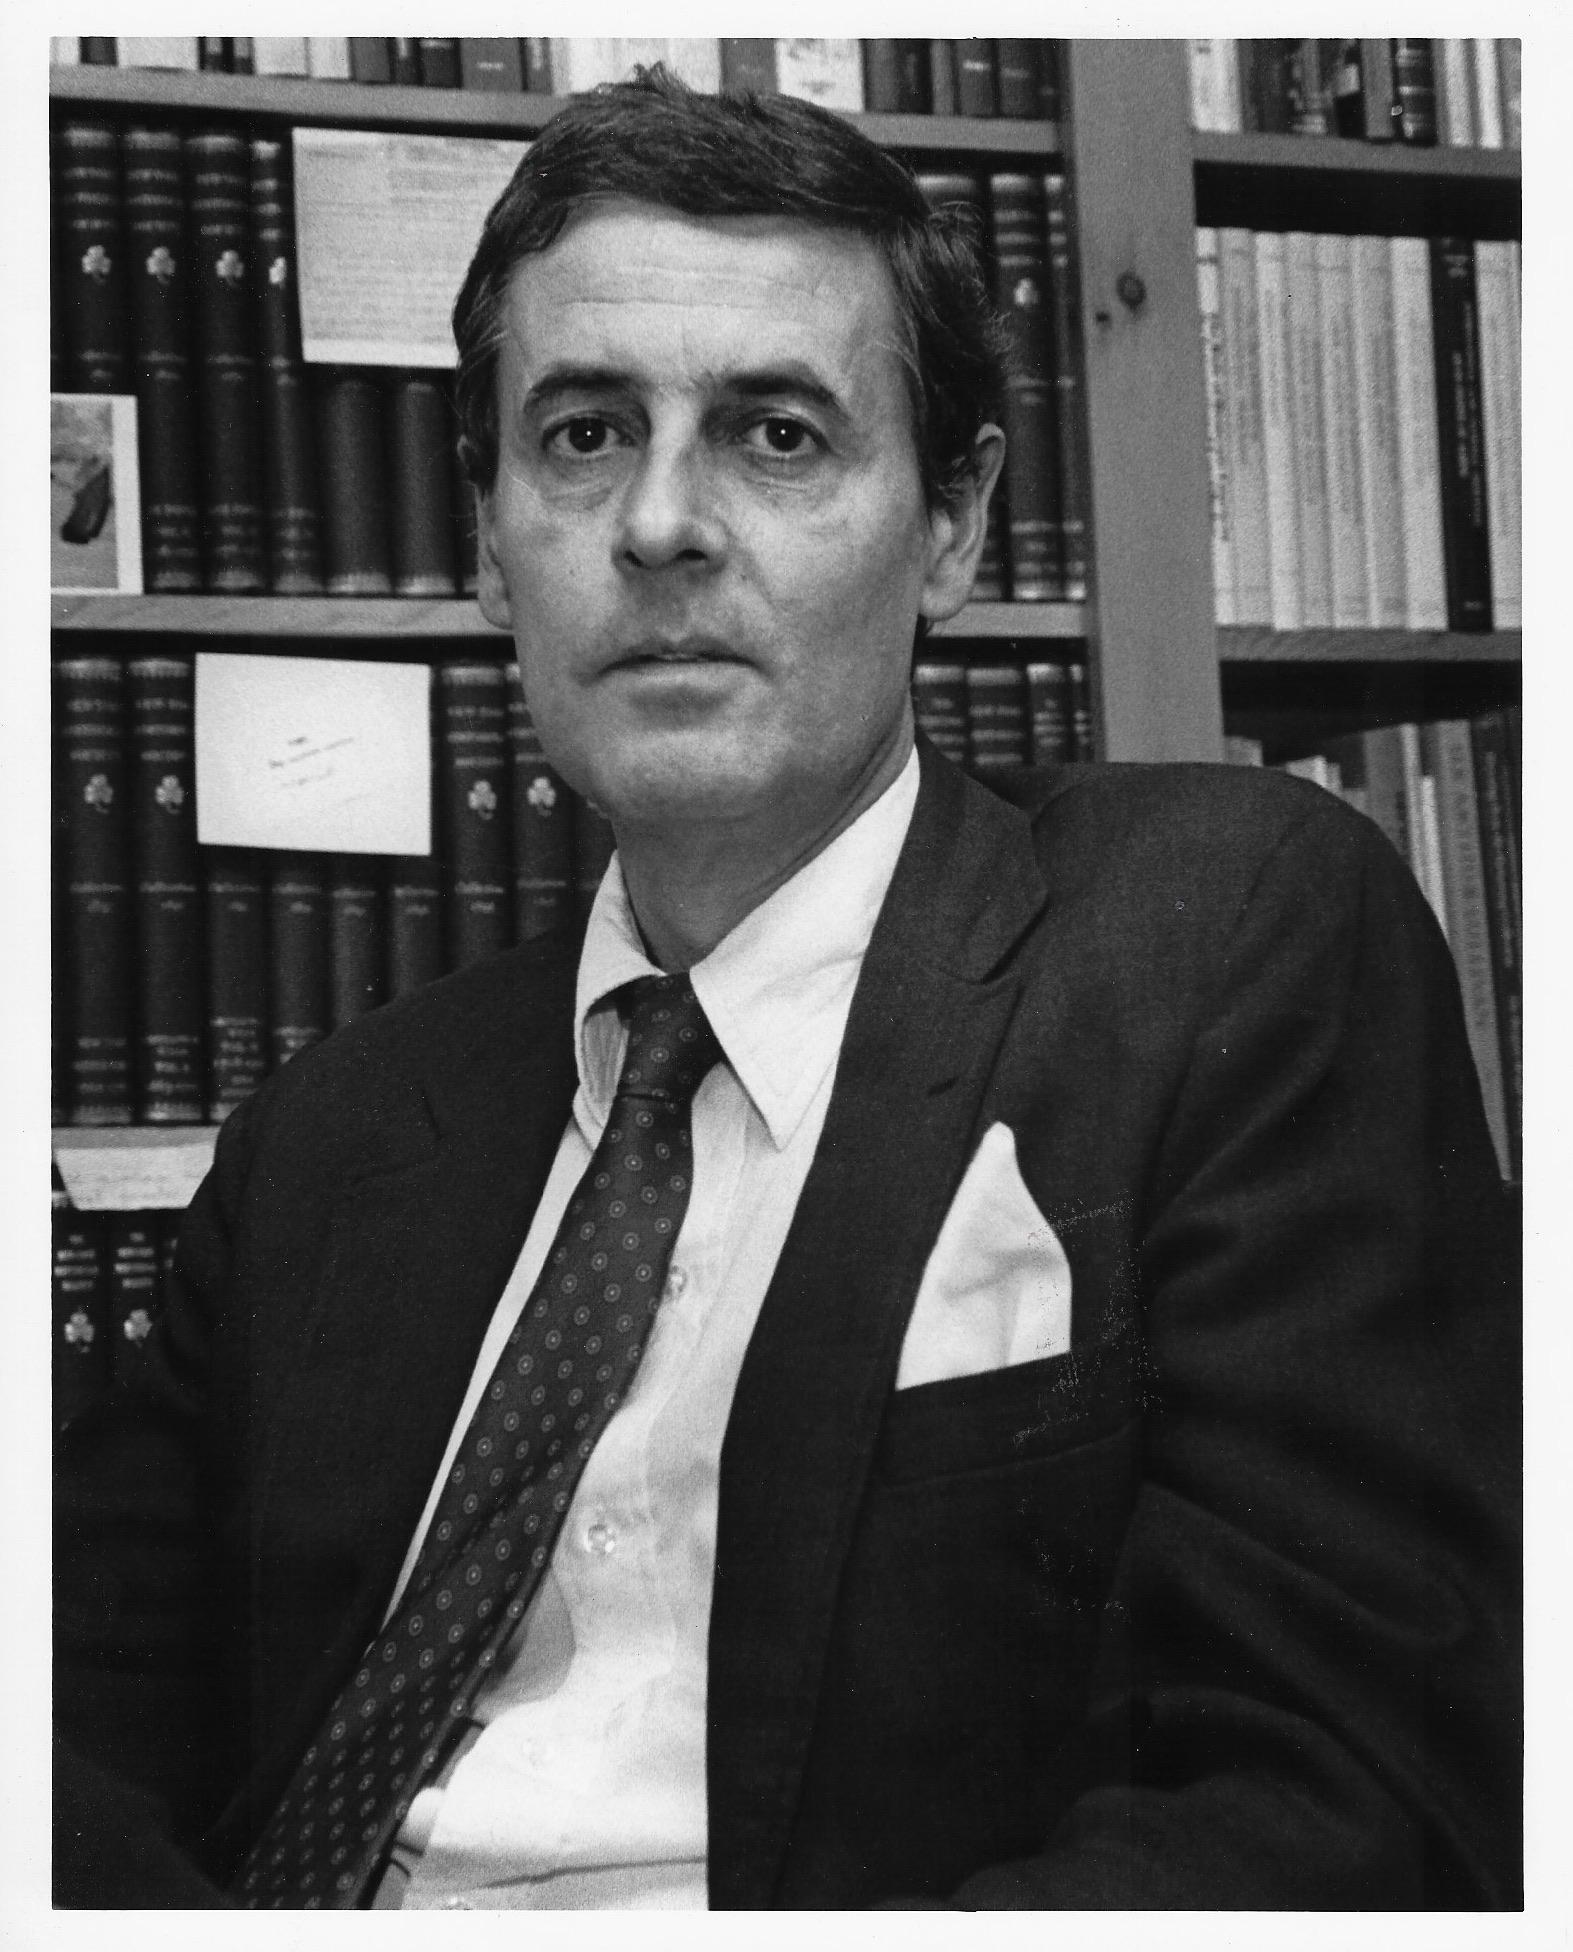 Black and white portrait of Wilson Walker Cowen in black suit and tie in front of bookshelves.